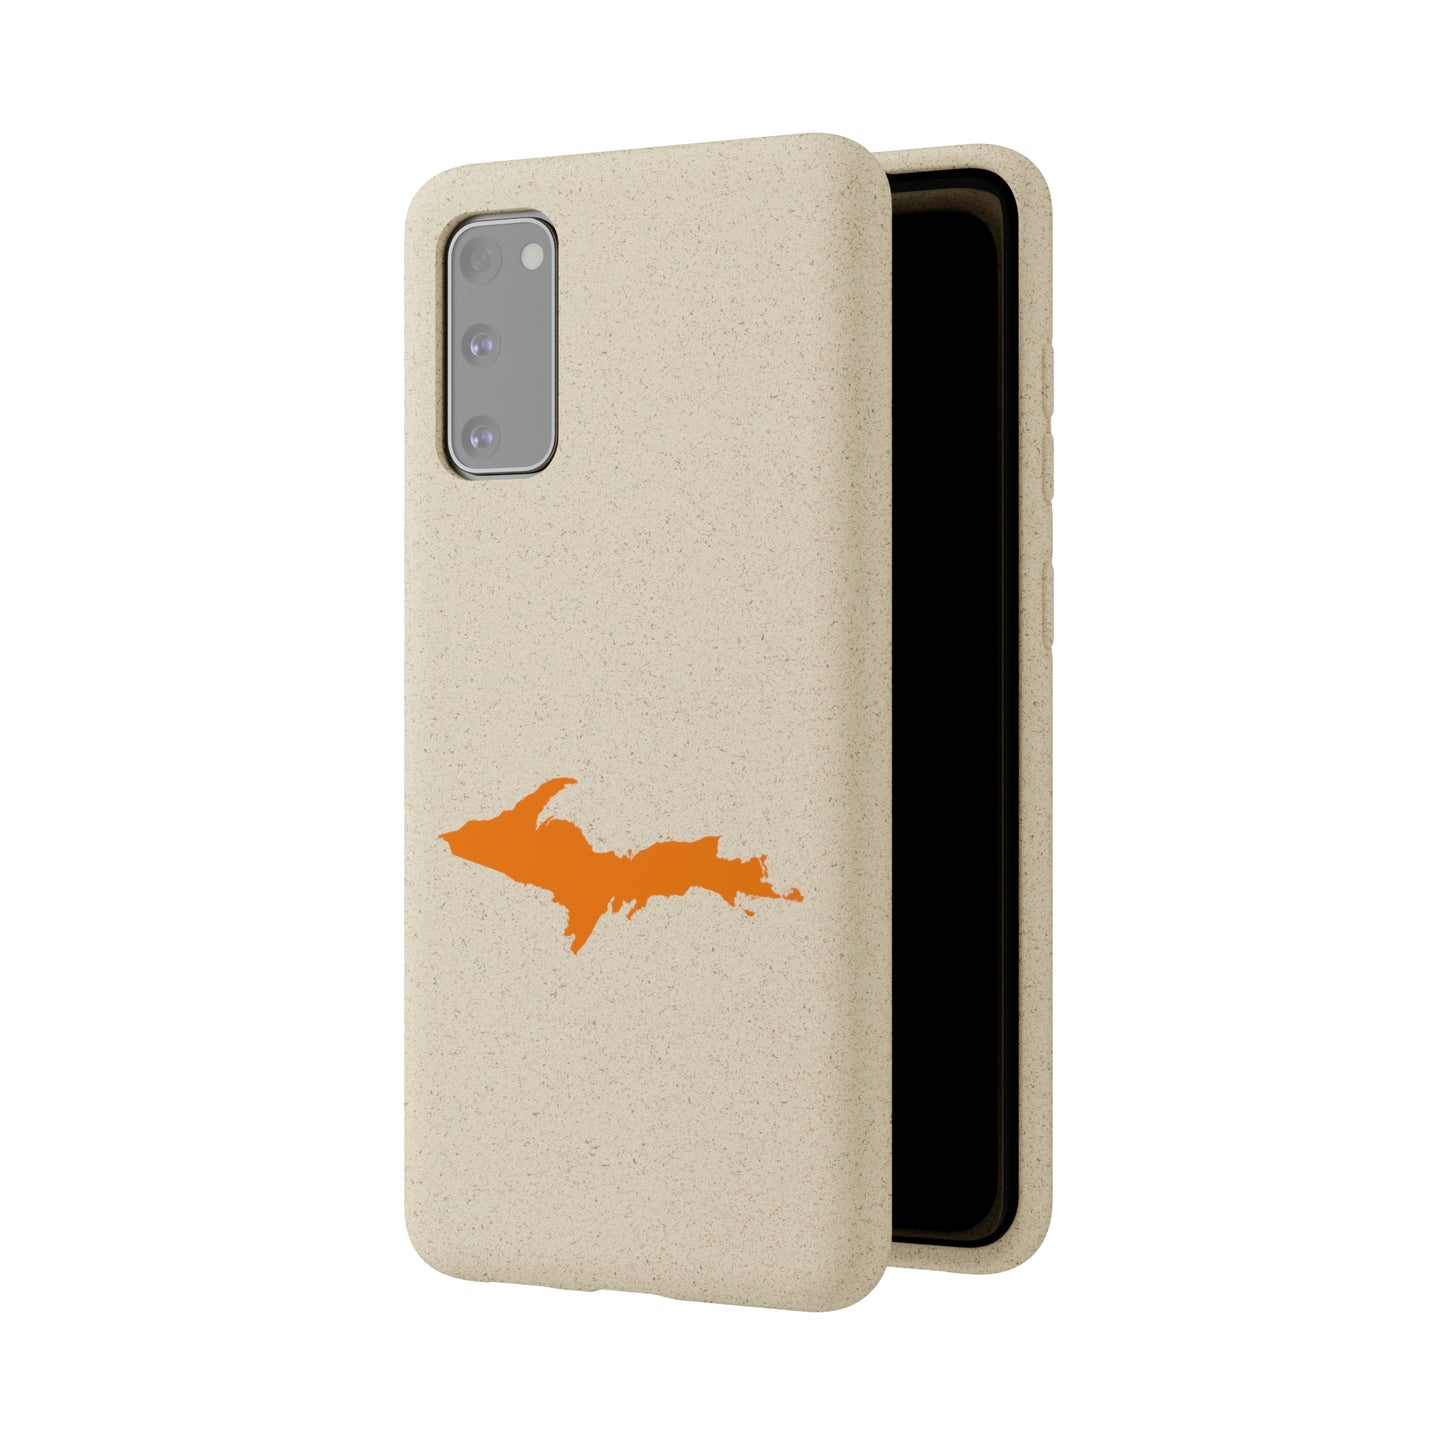 Michigan Upper Peninsula Biodegradable Phone Cases (w/ Orange UP Outline) | Samsung Android